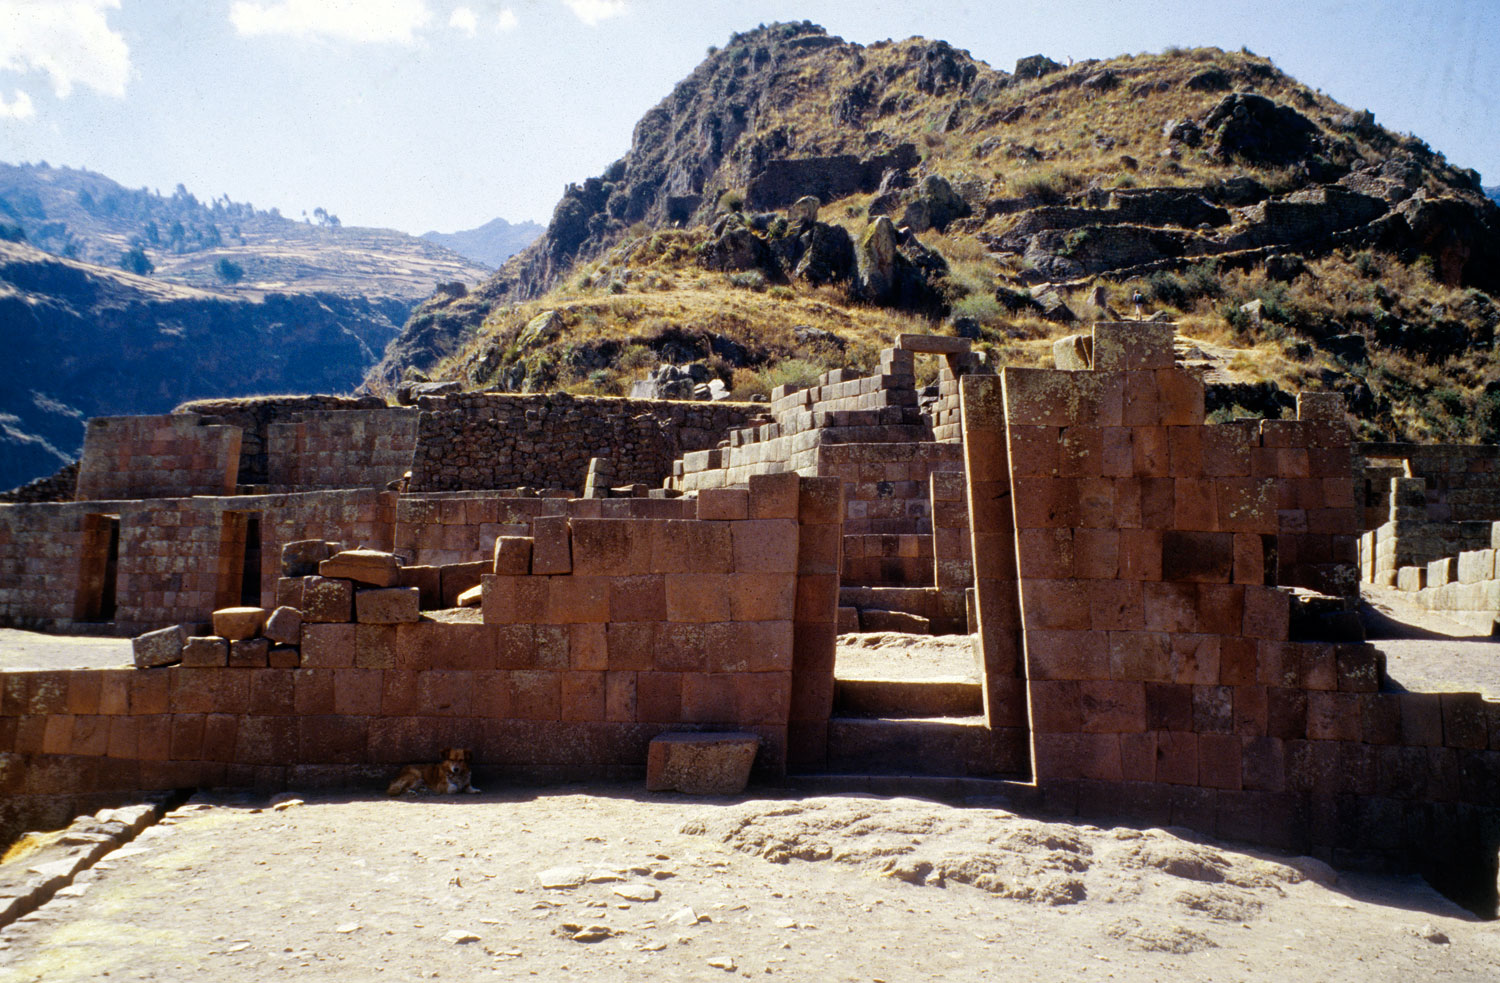 New Clues About Human Sacrifices at Ancient Peruvian Temple